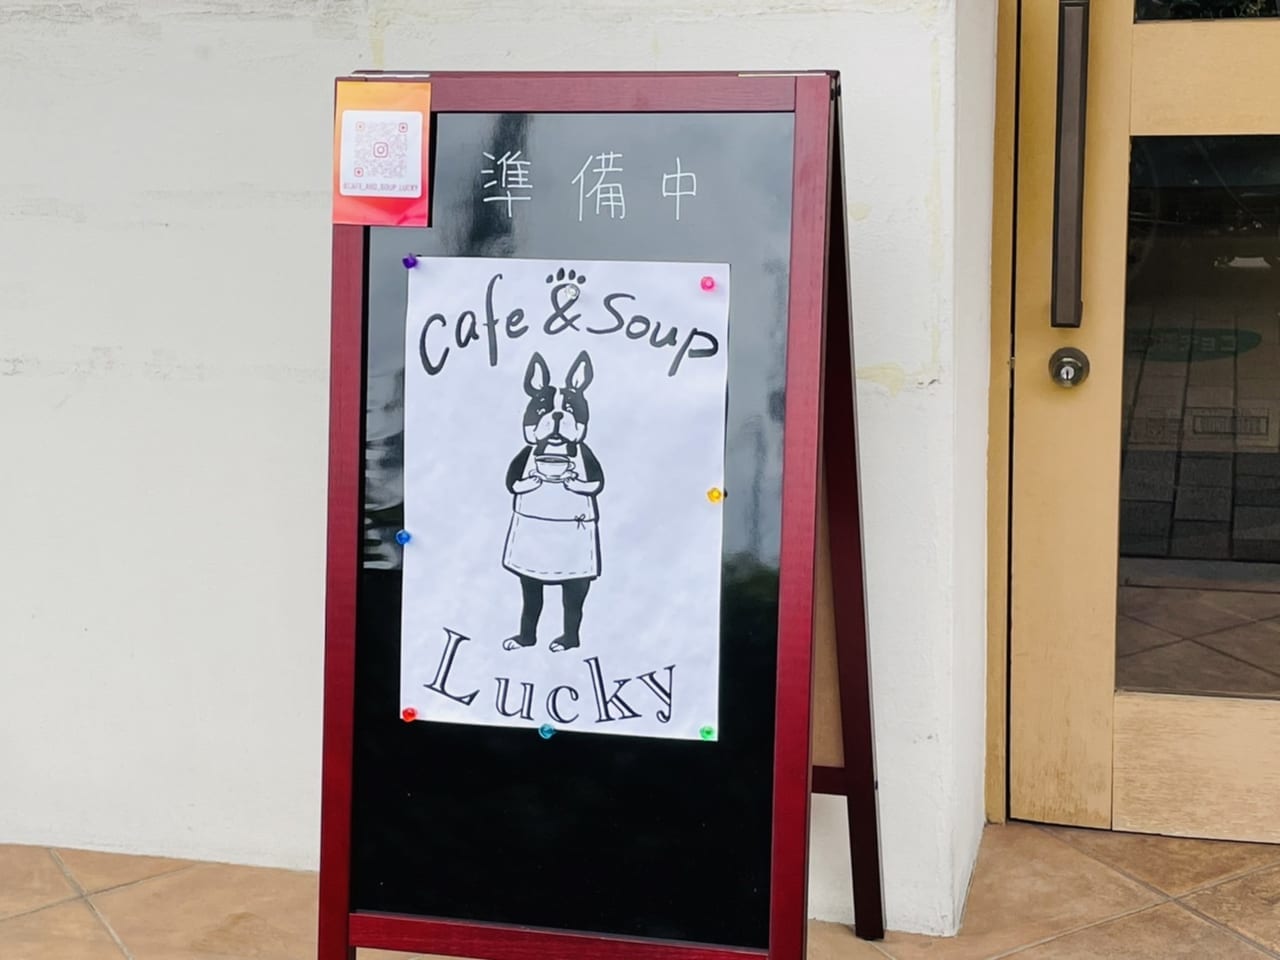 Cafe&Soup LUCKYと準備中の文字